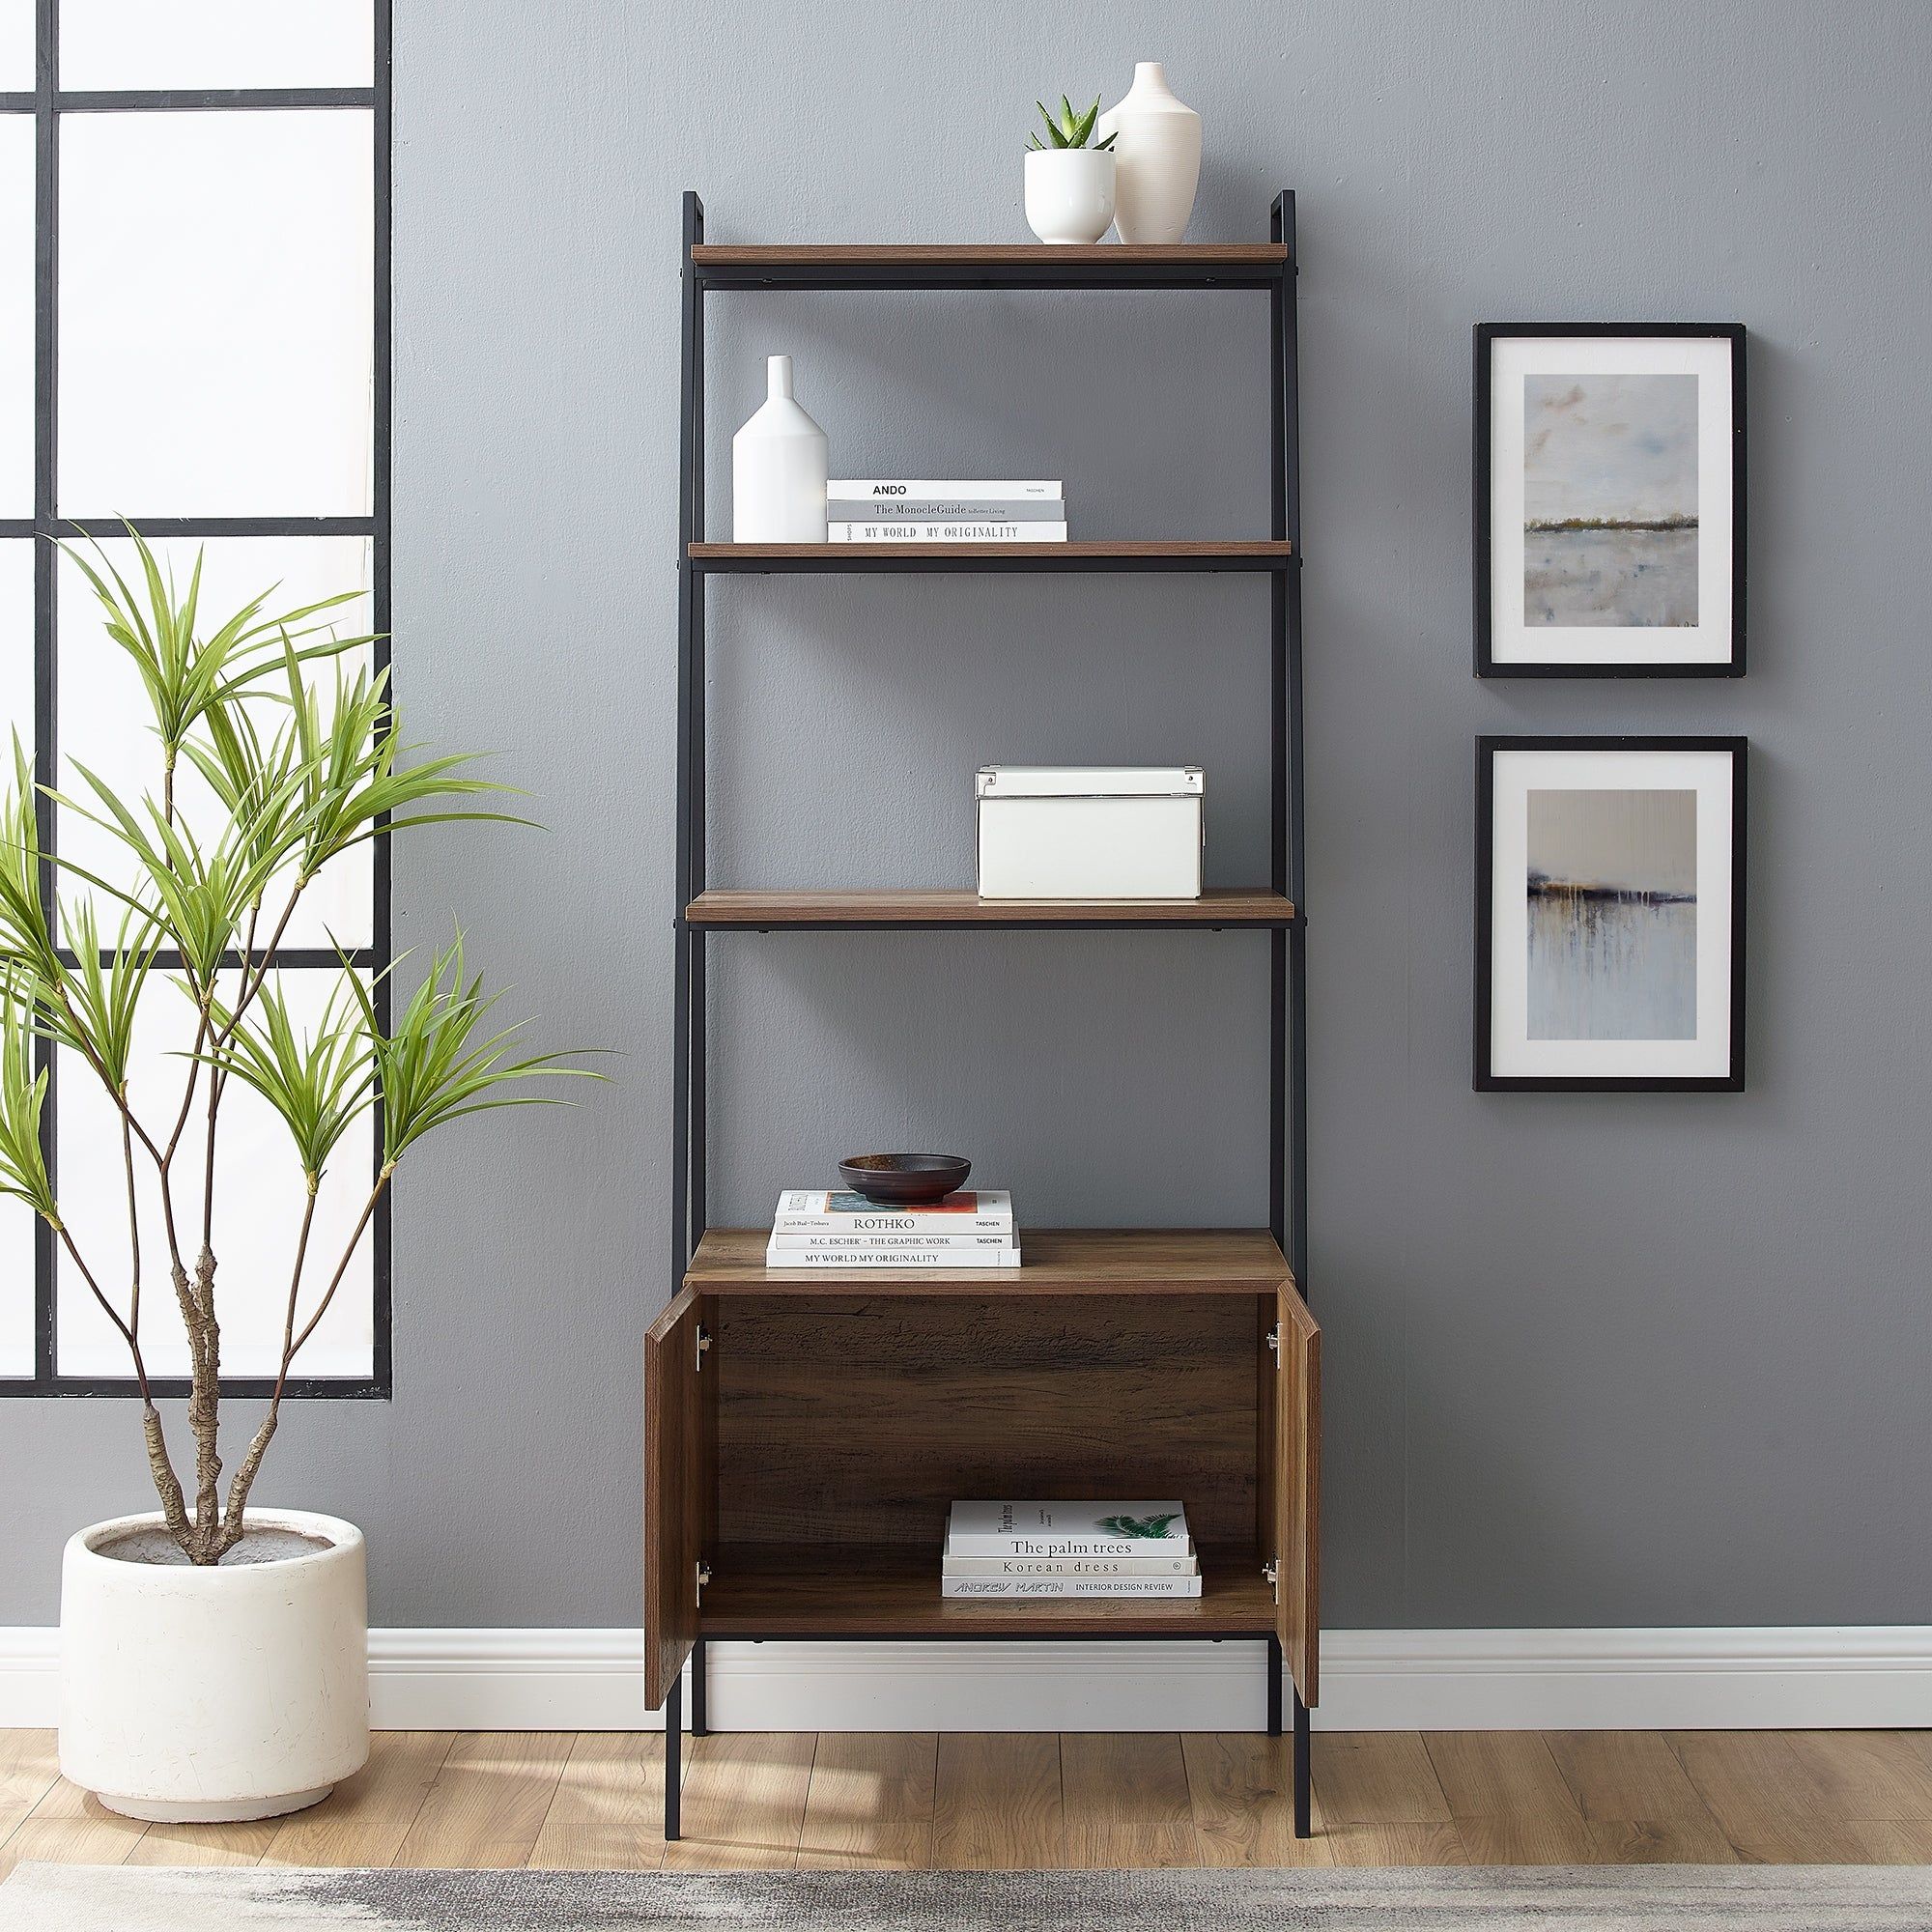 Middlebrook Lahuri 72 Inch Ladder Storage Bookshelf – Overstock – 22100536 Within 72 Inch Bookcases With Cabinet (View 5 of 15)